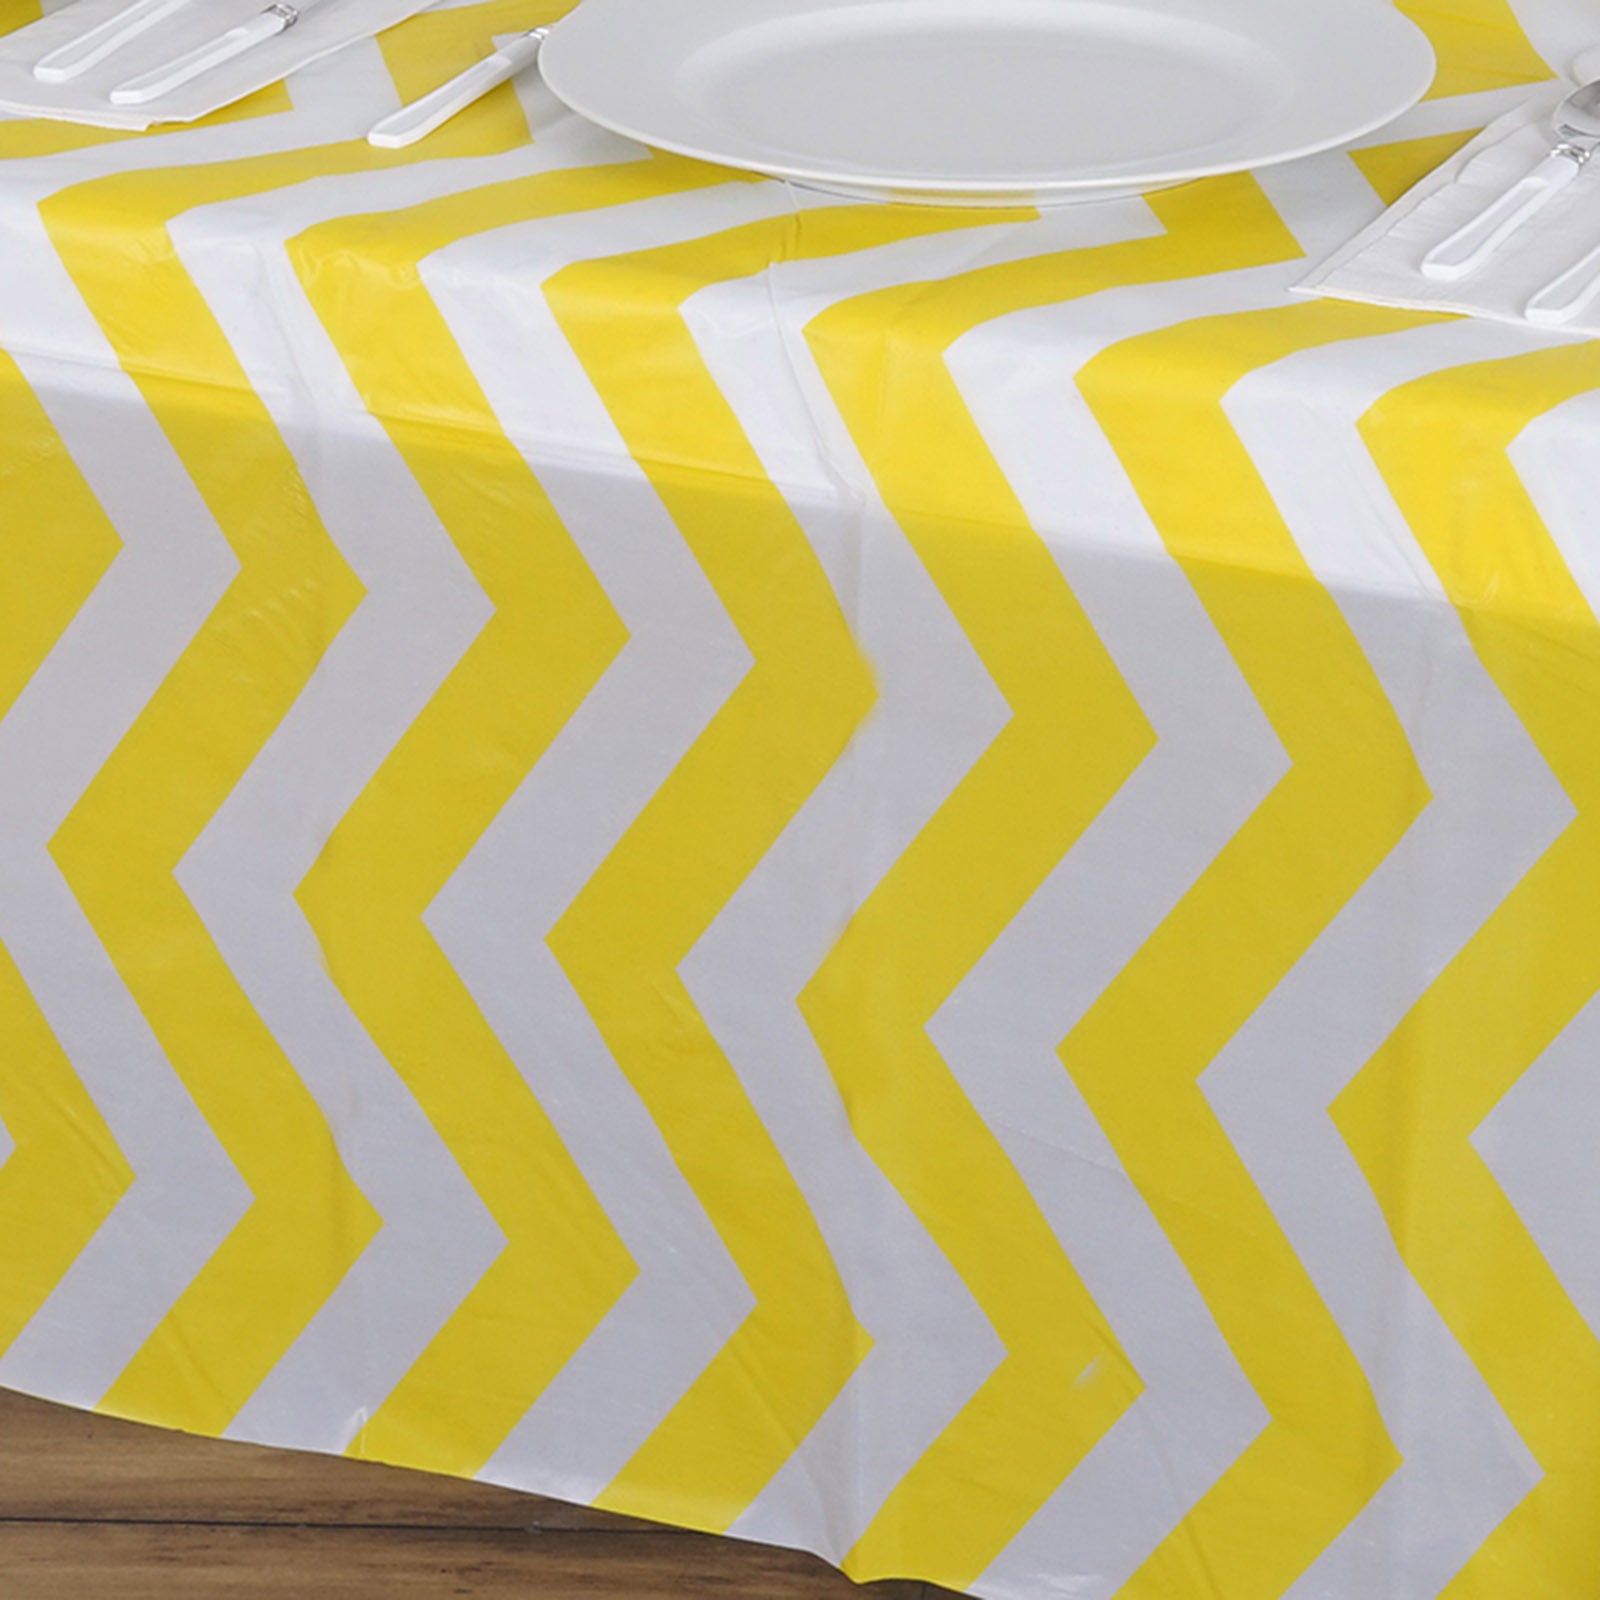 make-your-order-official-of-yellow-chevron-waterproof-plastic-tablecloth-pvc-rectangle-disposable-table-cover-54×72-online_2.jpg